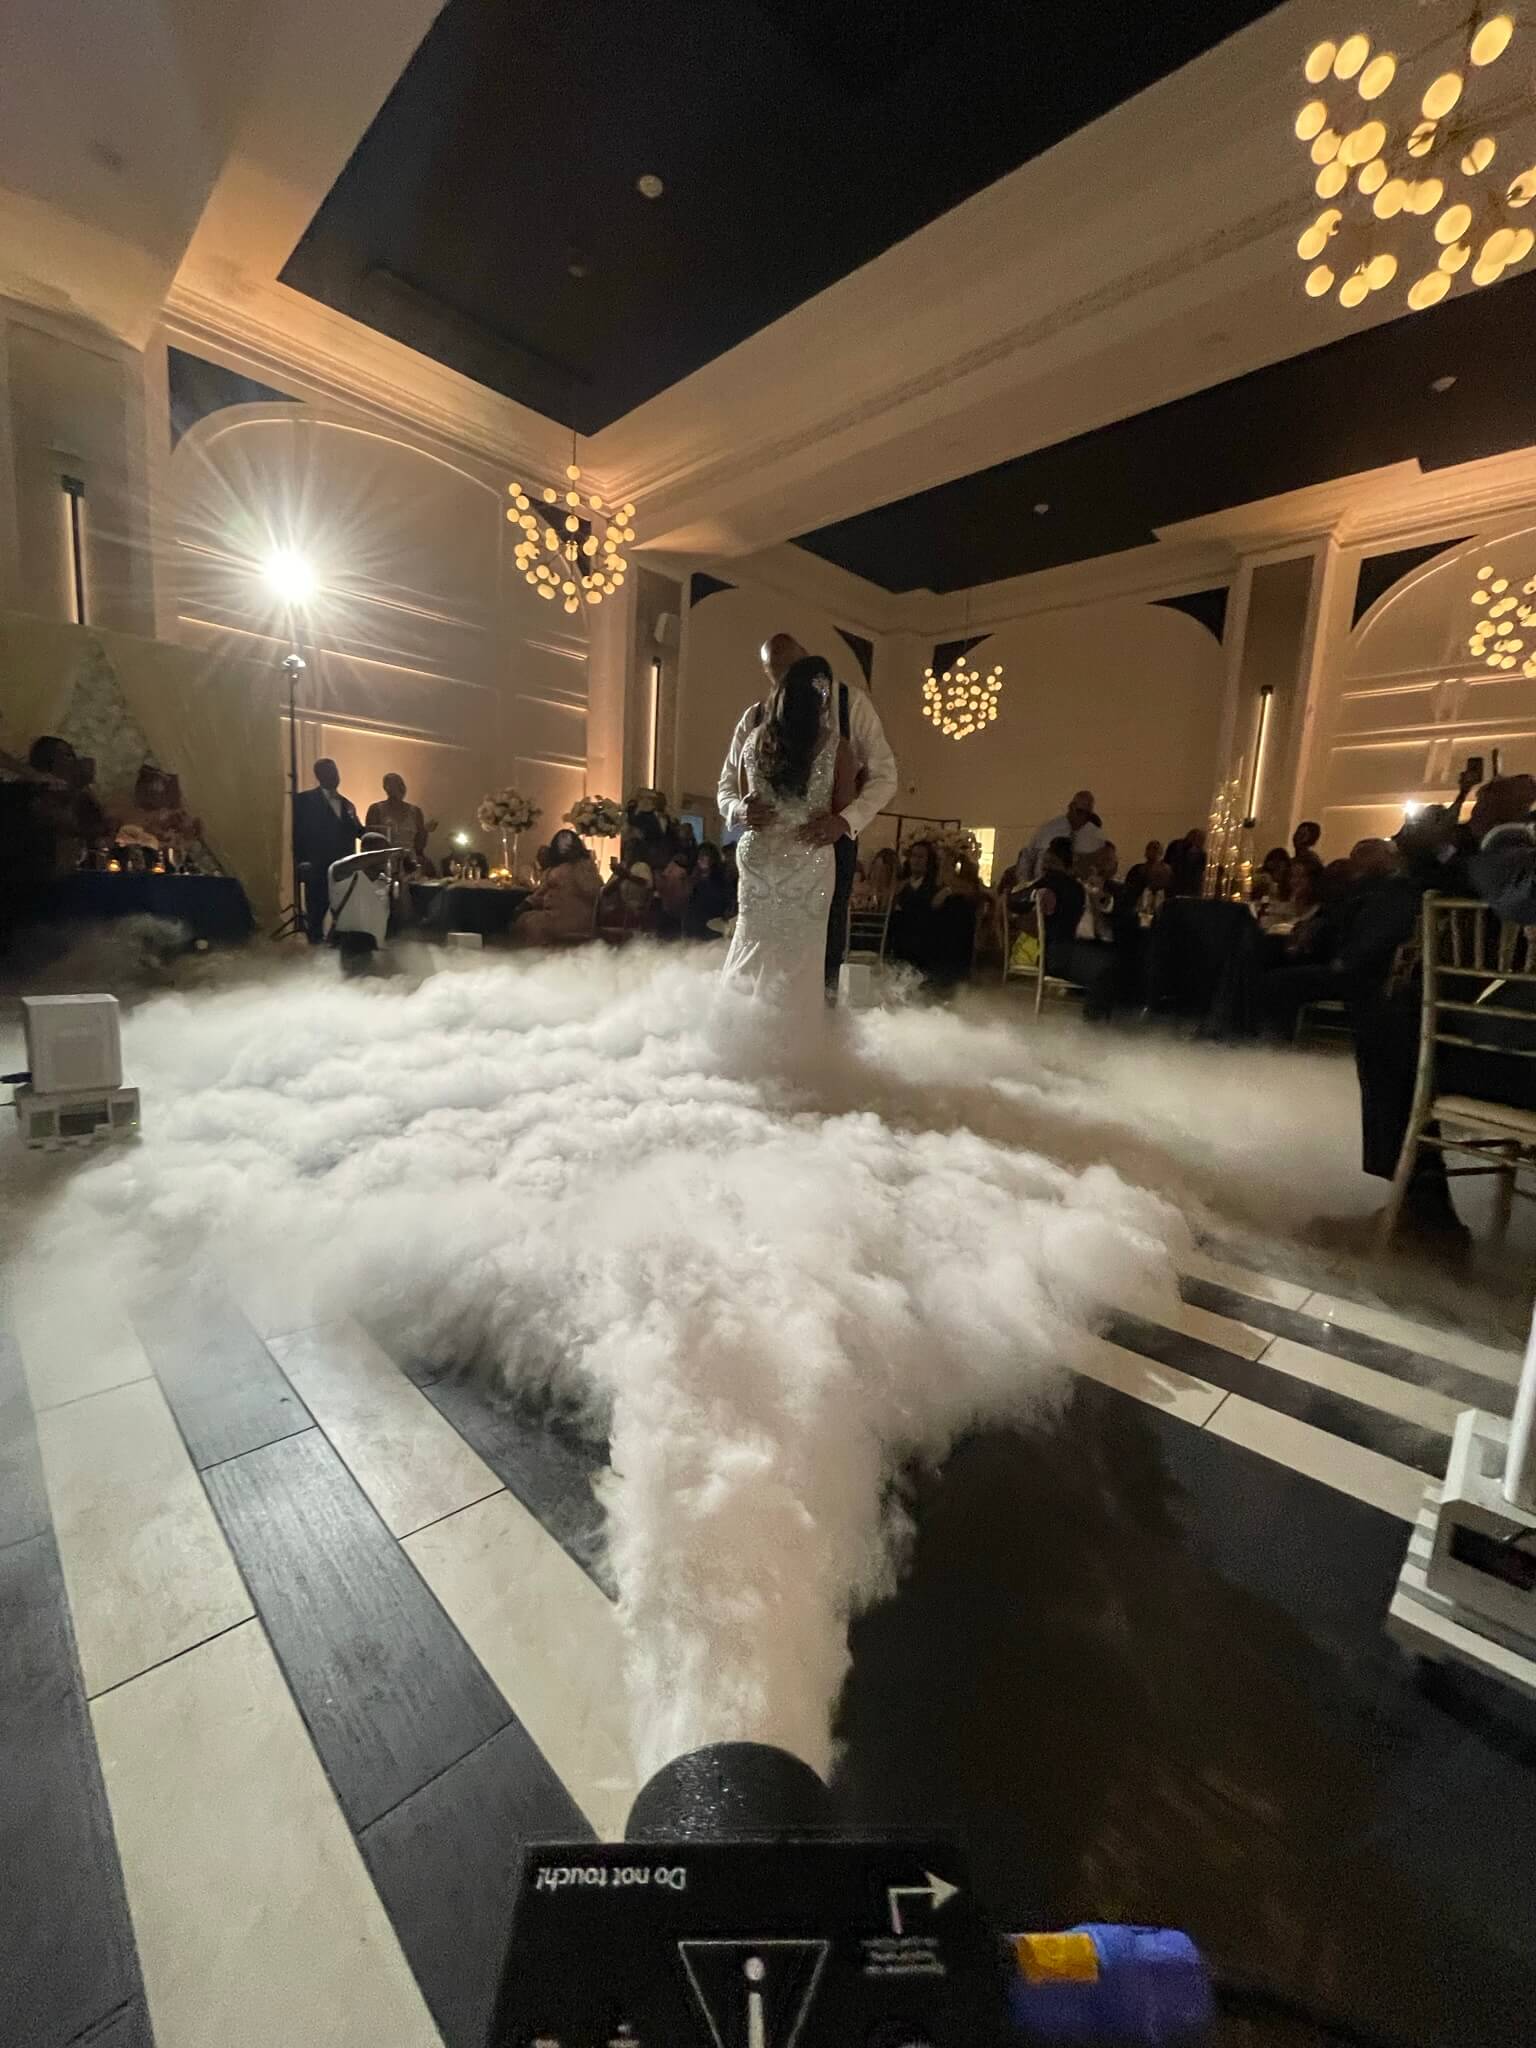 Couple sharing a first dance on a dance floor surrounded by a cloud effect with guests watching in the background.